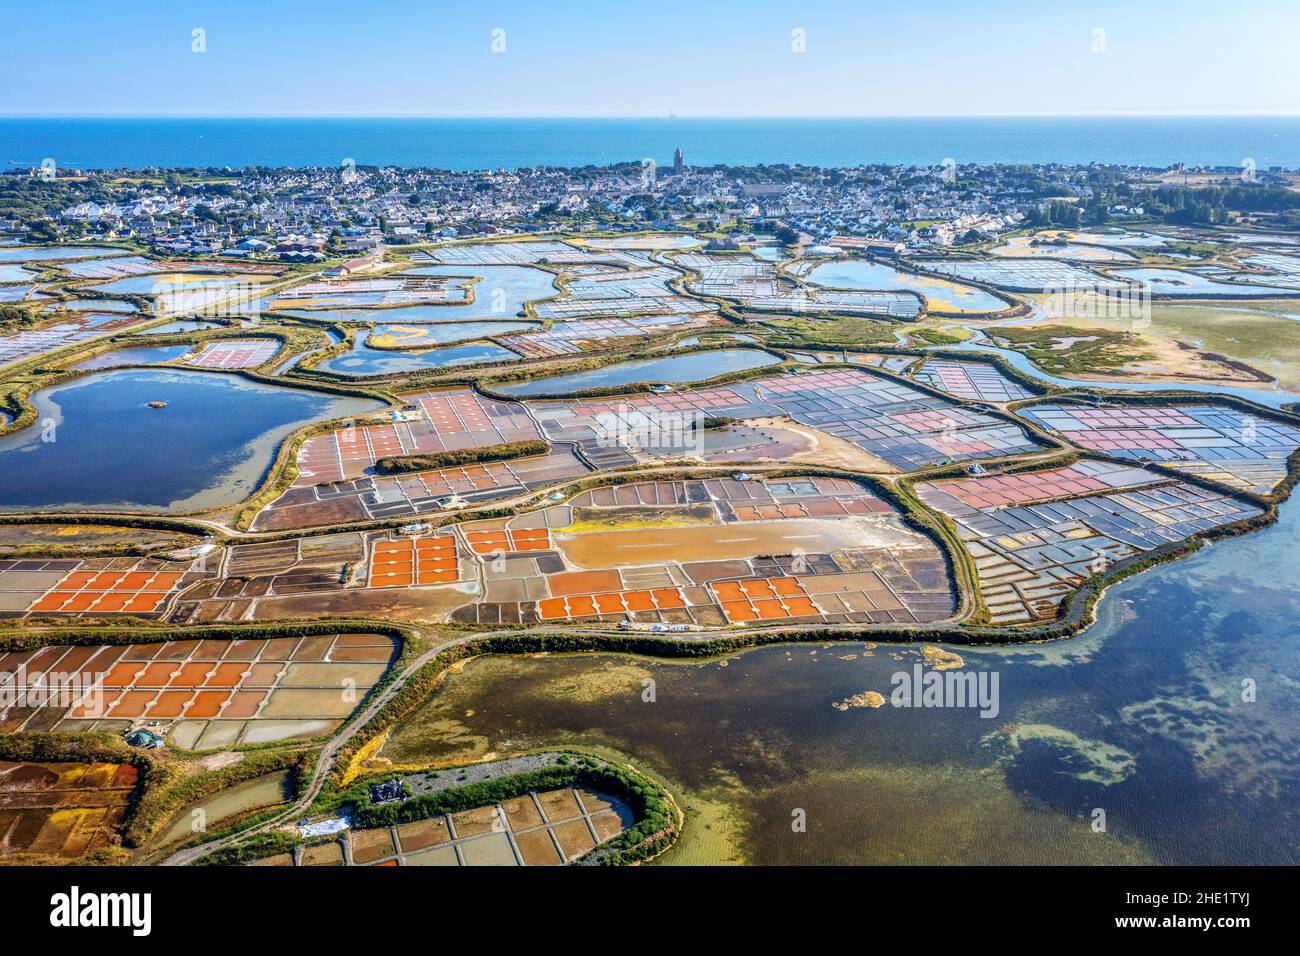 Aerial view of the salt marshes of Guerande by Batz-sur-Mer town, famous for its production of the grey salt of Guerande, Atlantic coast of France Stock Photo